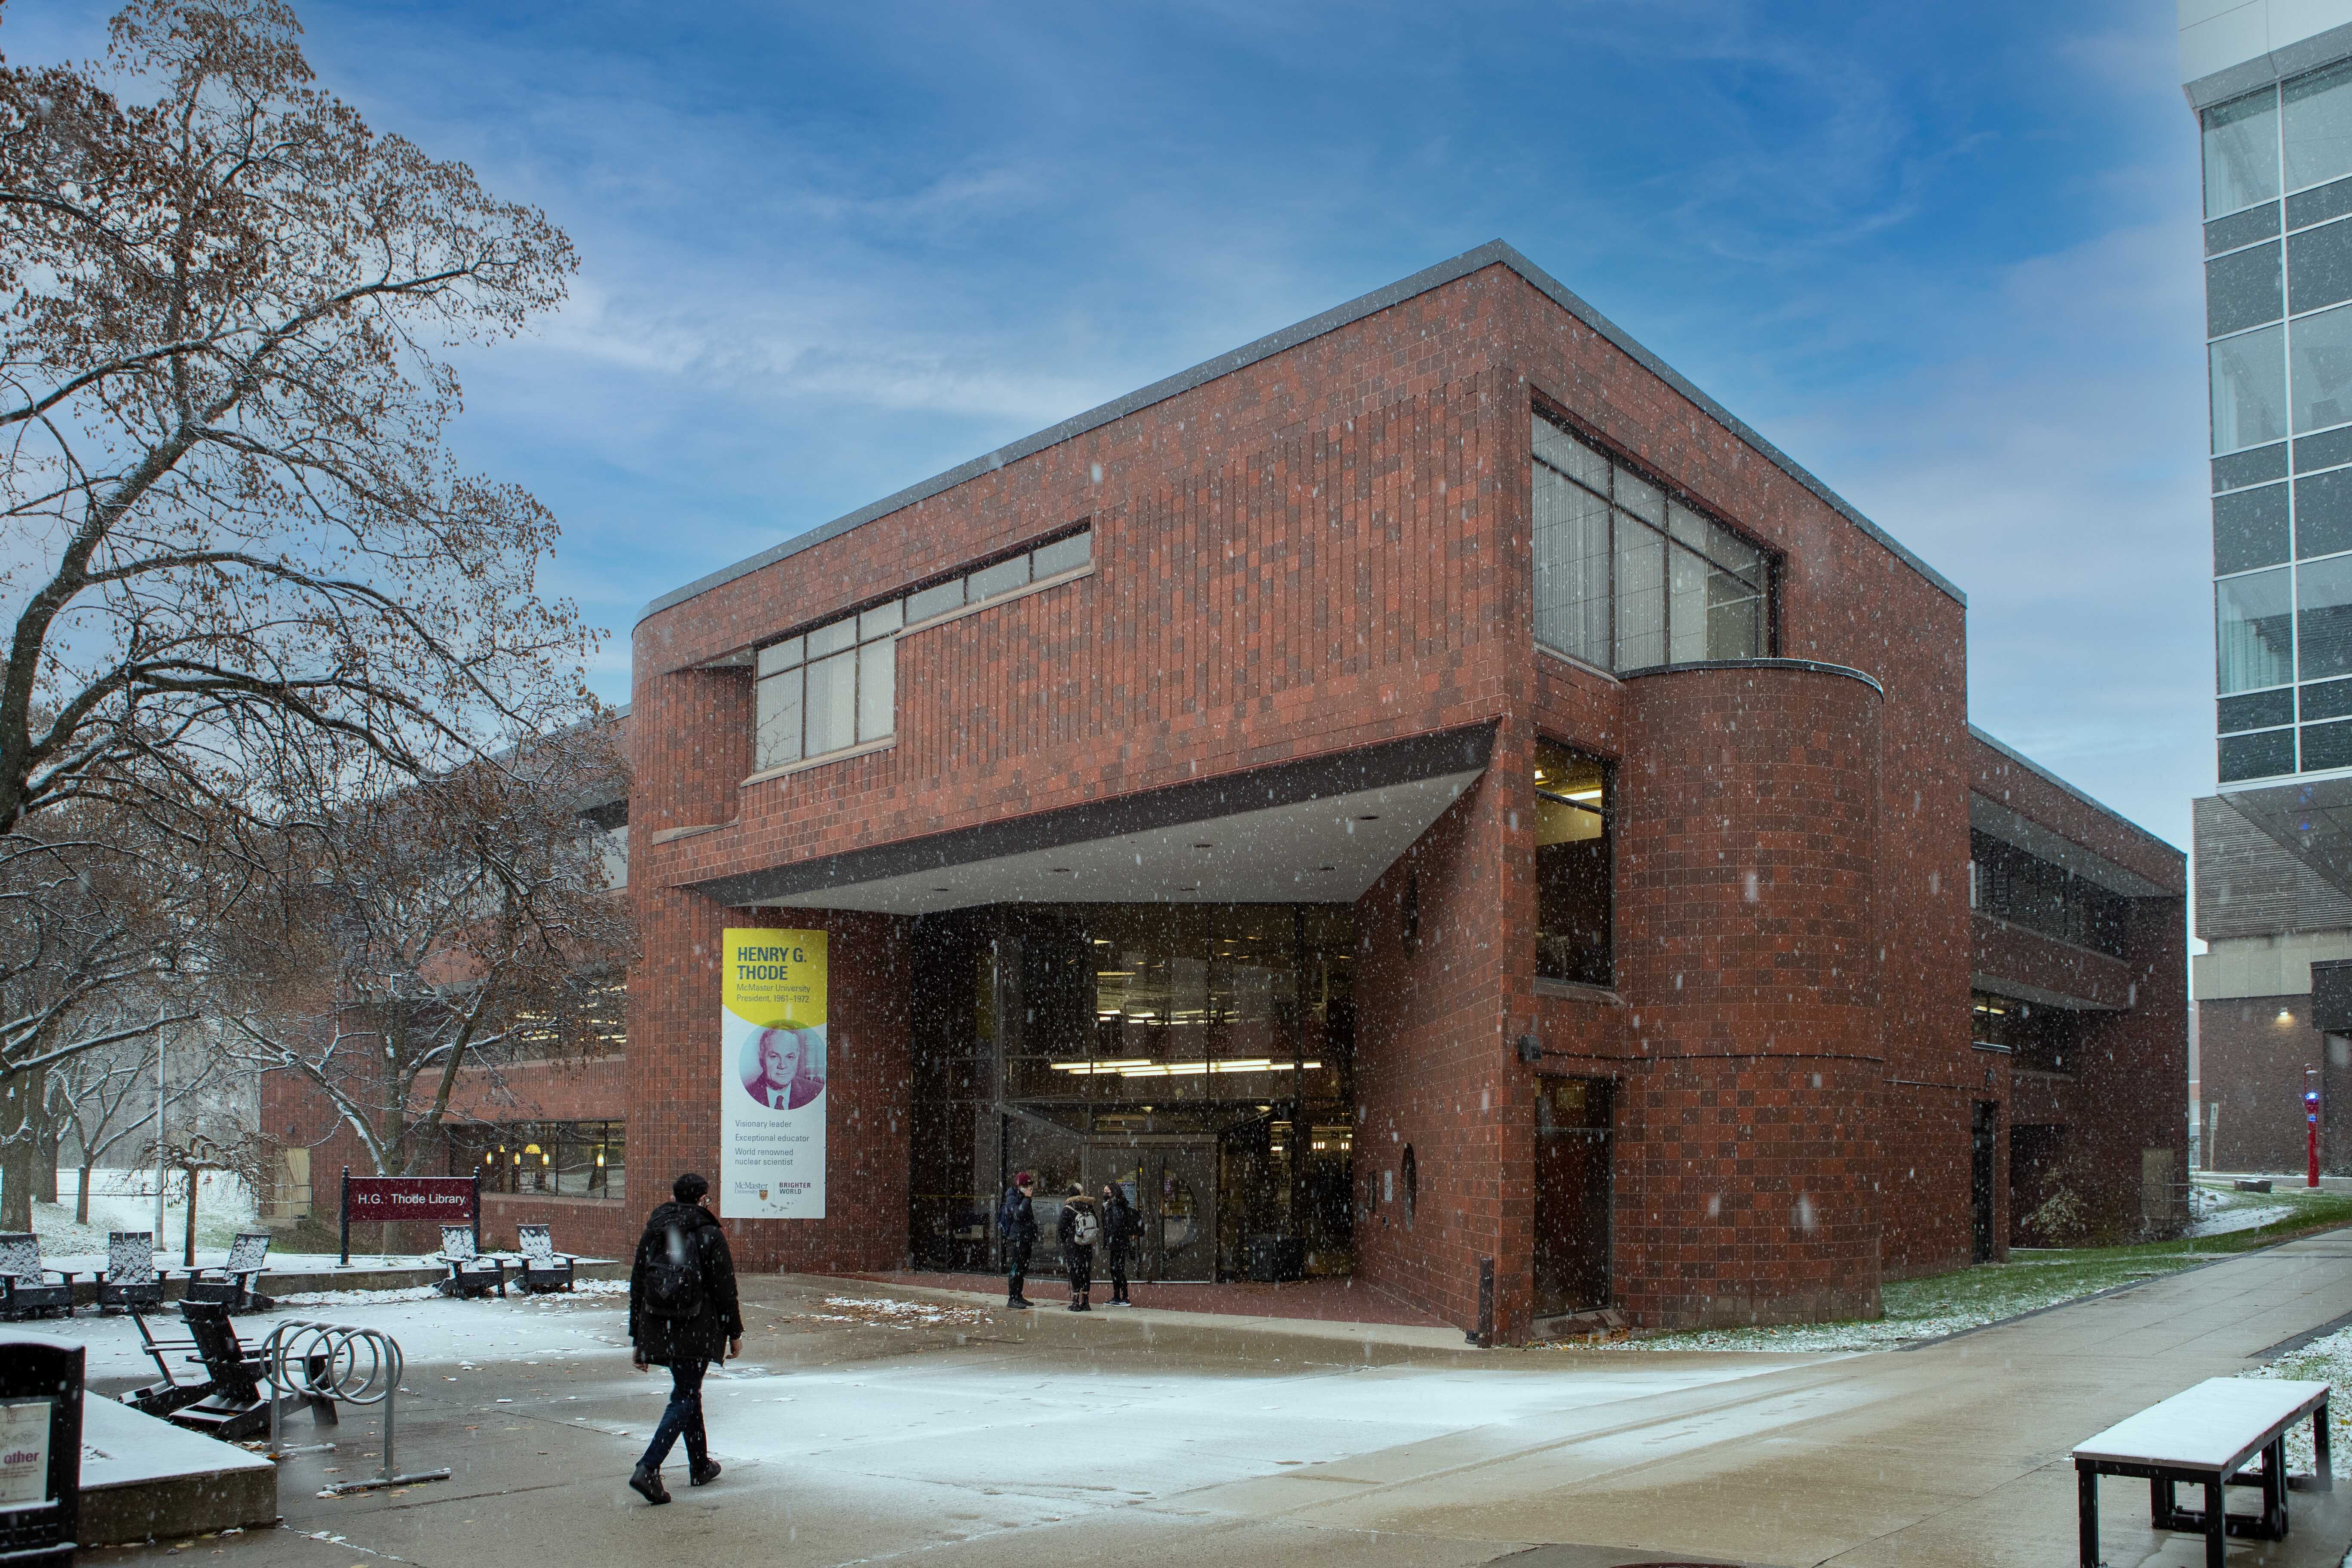 Exterior of Thode library during winter can be seen.